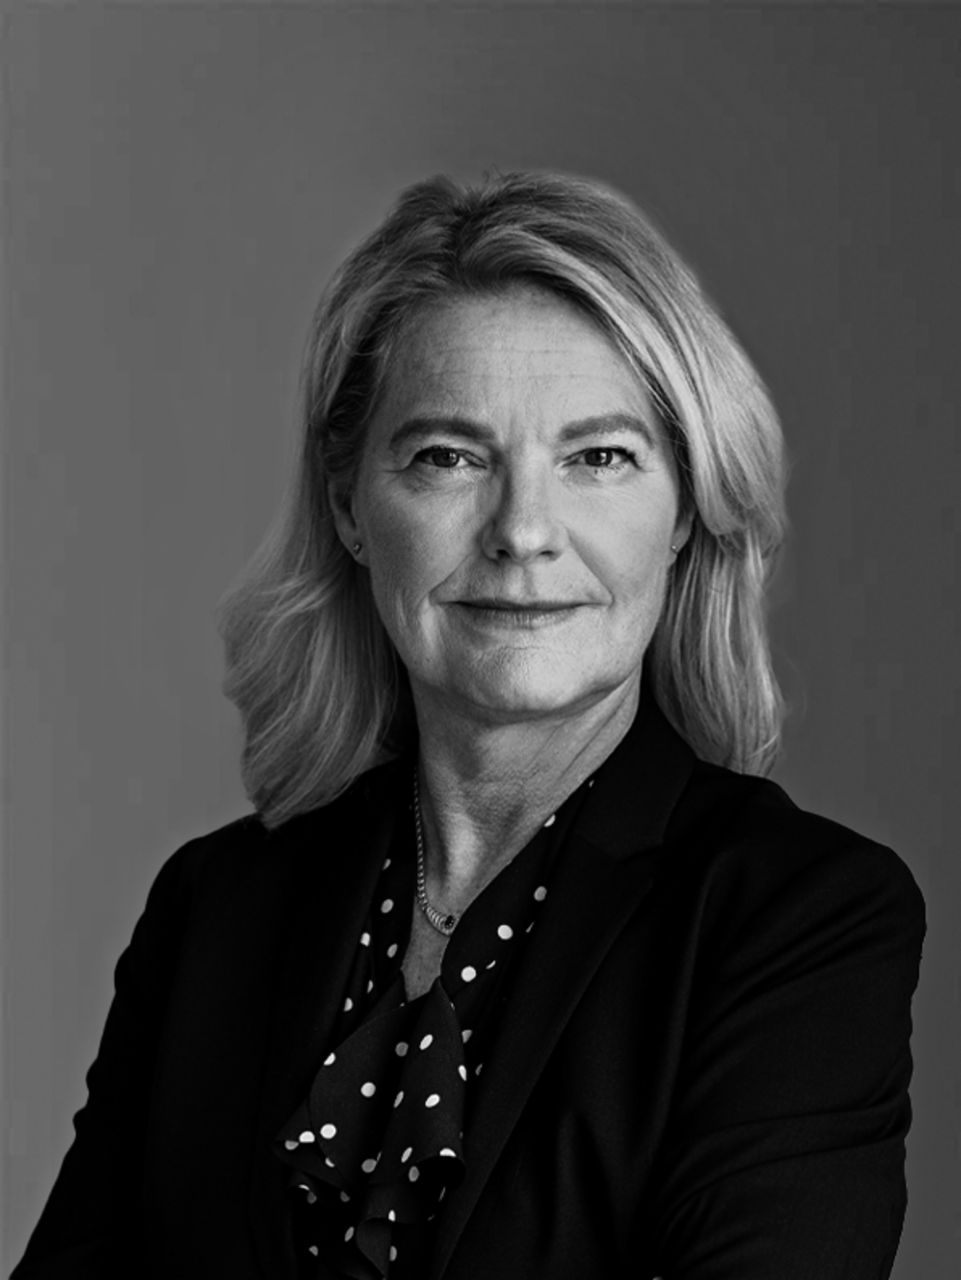 Catharina Modahl Nilsson, Member of the Executive Board of TRATON SE, responsible for TRATON Group Product Management